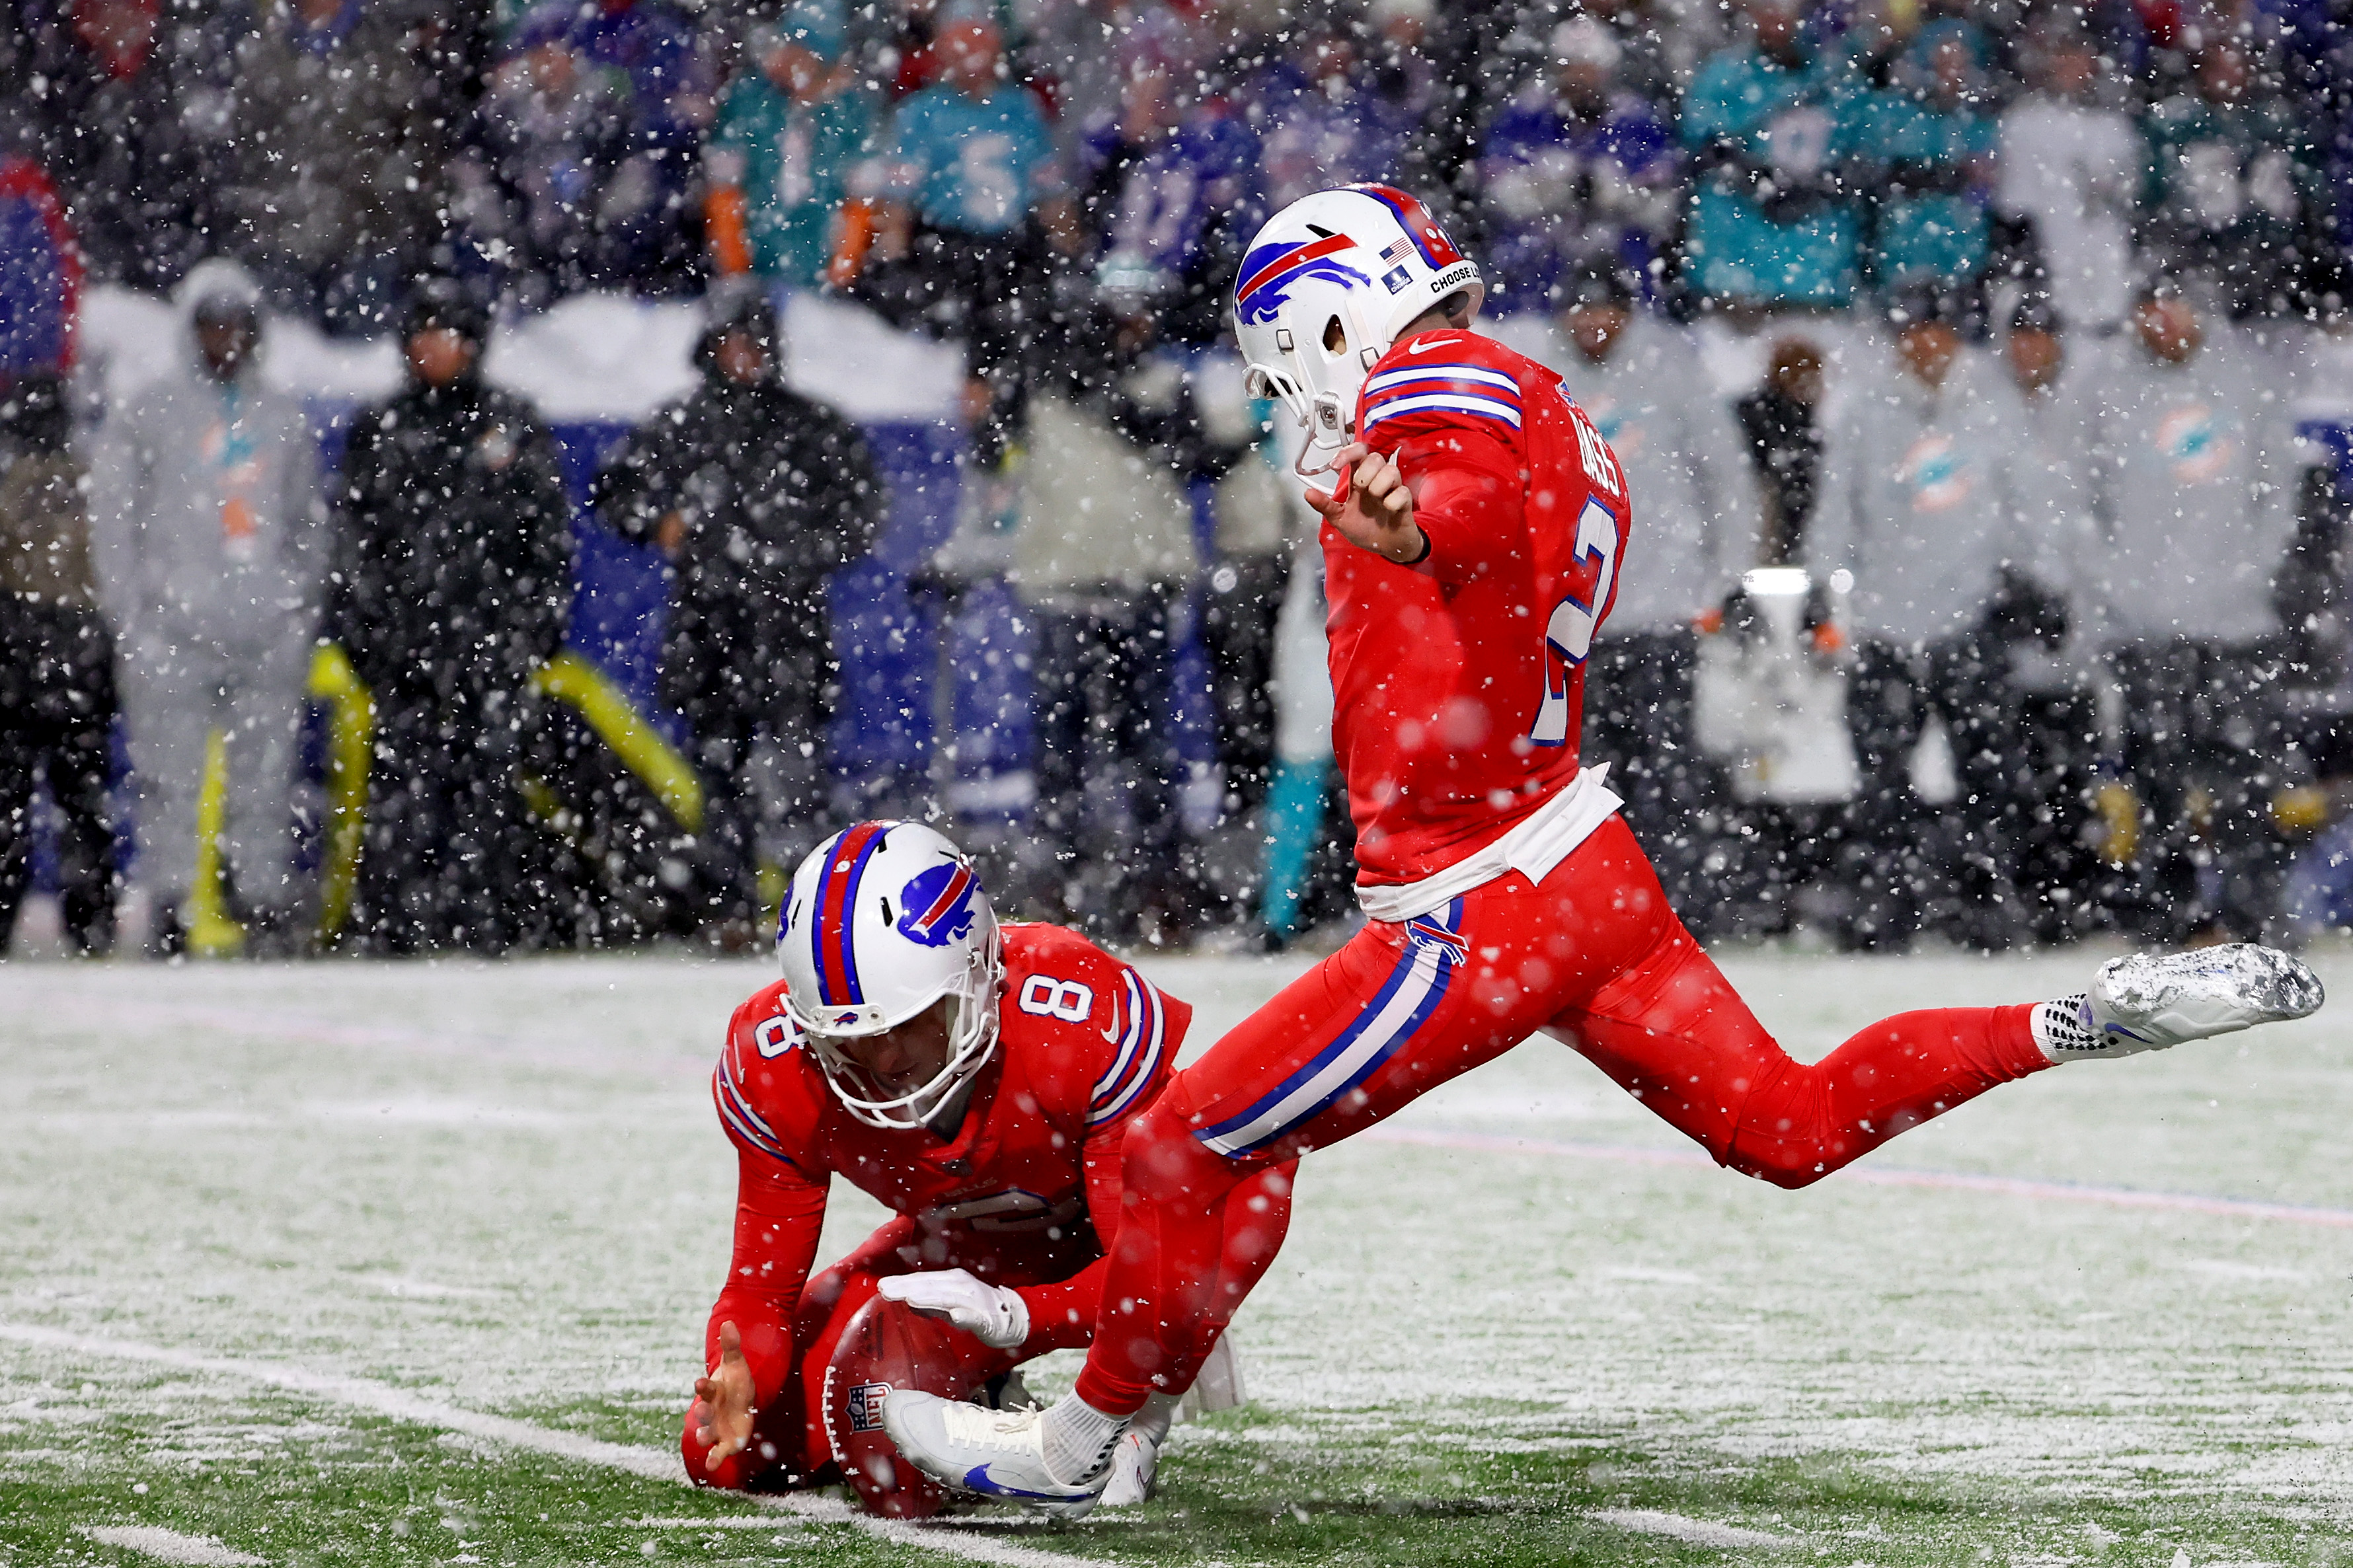 Kicker Tyler Bass (R) of the Buffalo Bills shoots a field goal in the game against the Miami Dolphins at Highmark Stadium in Orchard Park, New York, December 17, 2022. /CFP